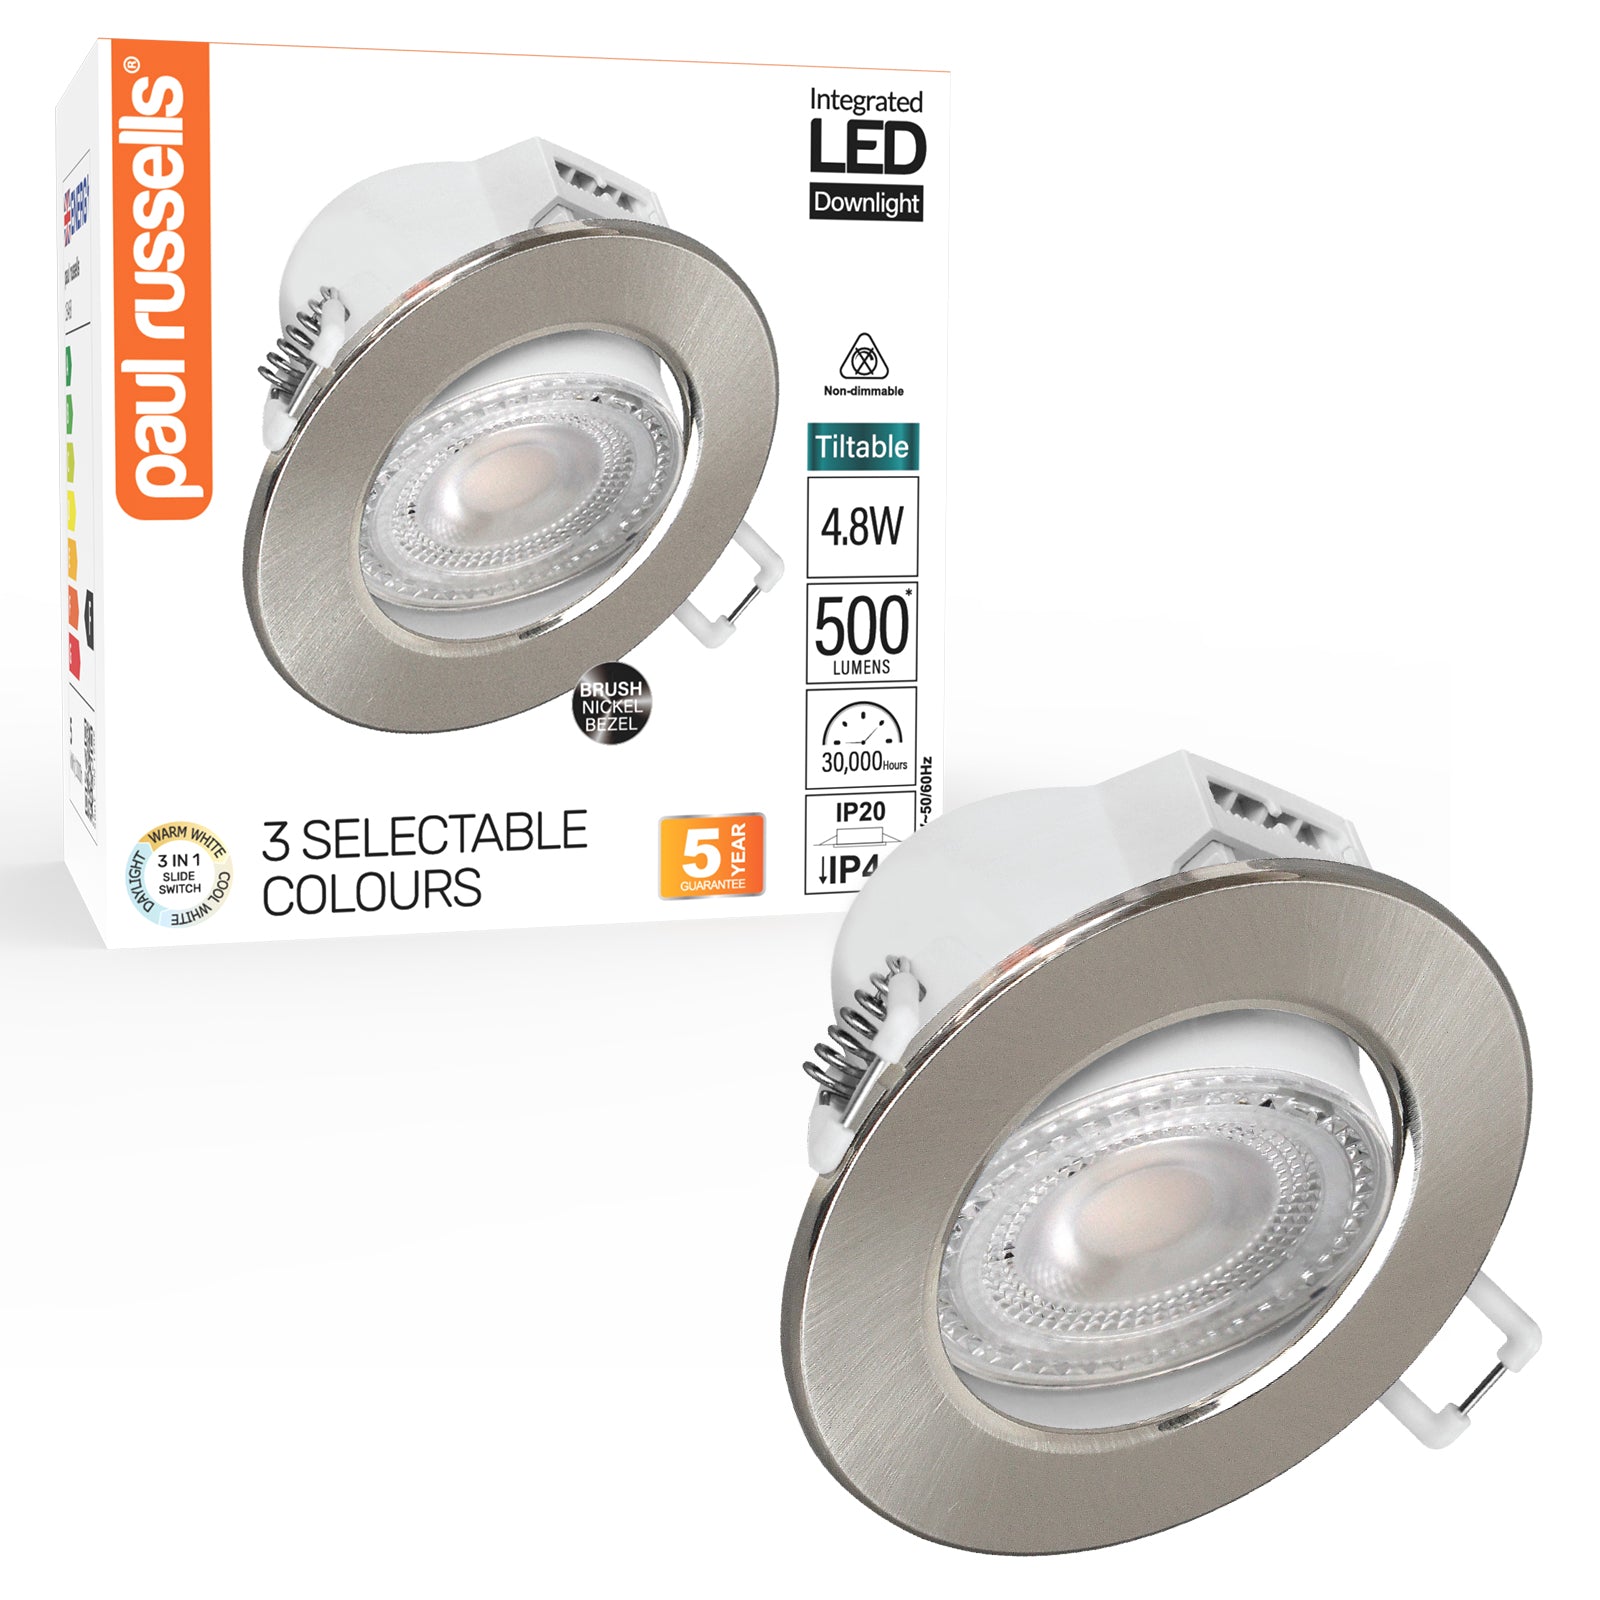 Paul Russells 4.8W LED Non Fire Rated Tiltable Downlight, Warm/Cool/Day White 3 Adjustable CCT, IP44, Brush Nickel Bezel